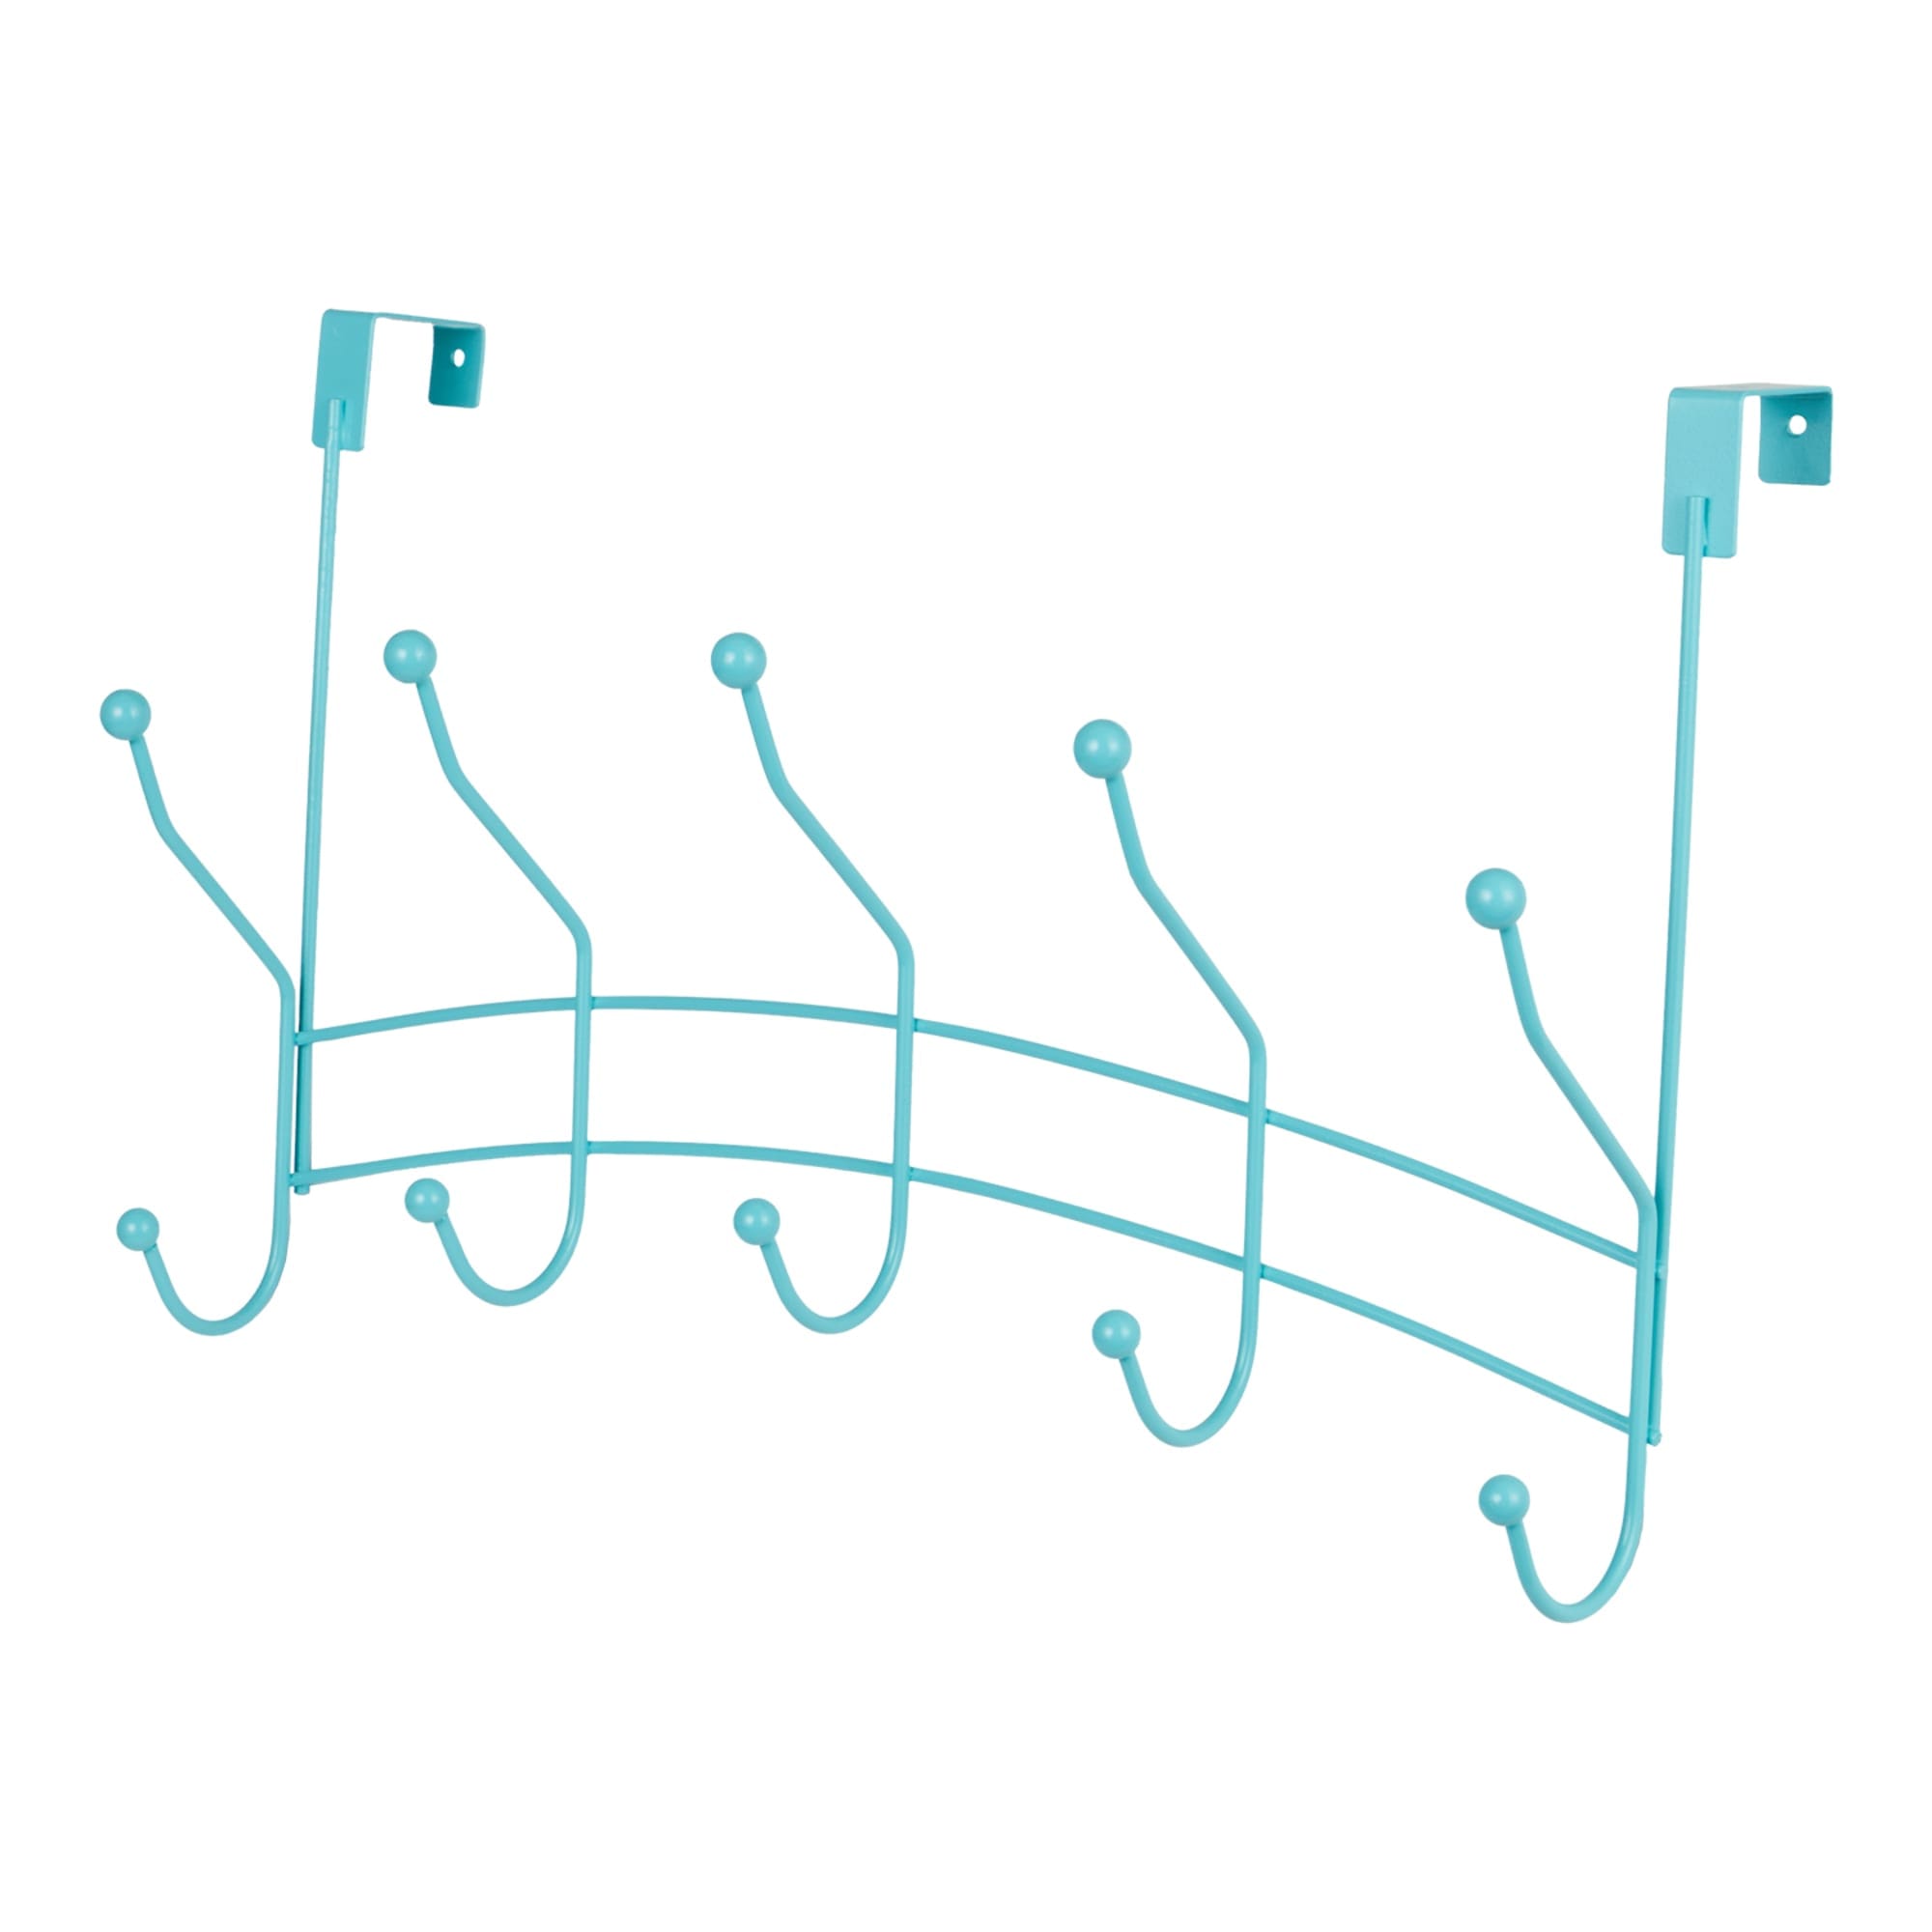 Home Basics Shelby 5 Hook Over the Door Hanging Rack, Turquoise $5.00 EACH, CASE PACK OF 12